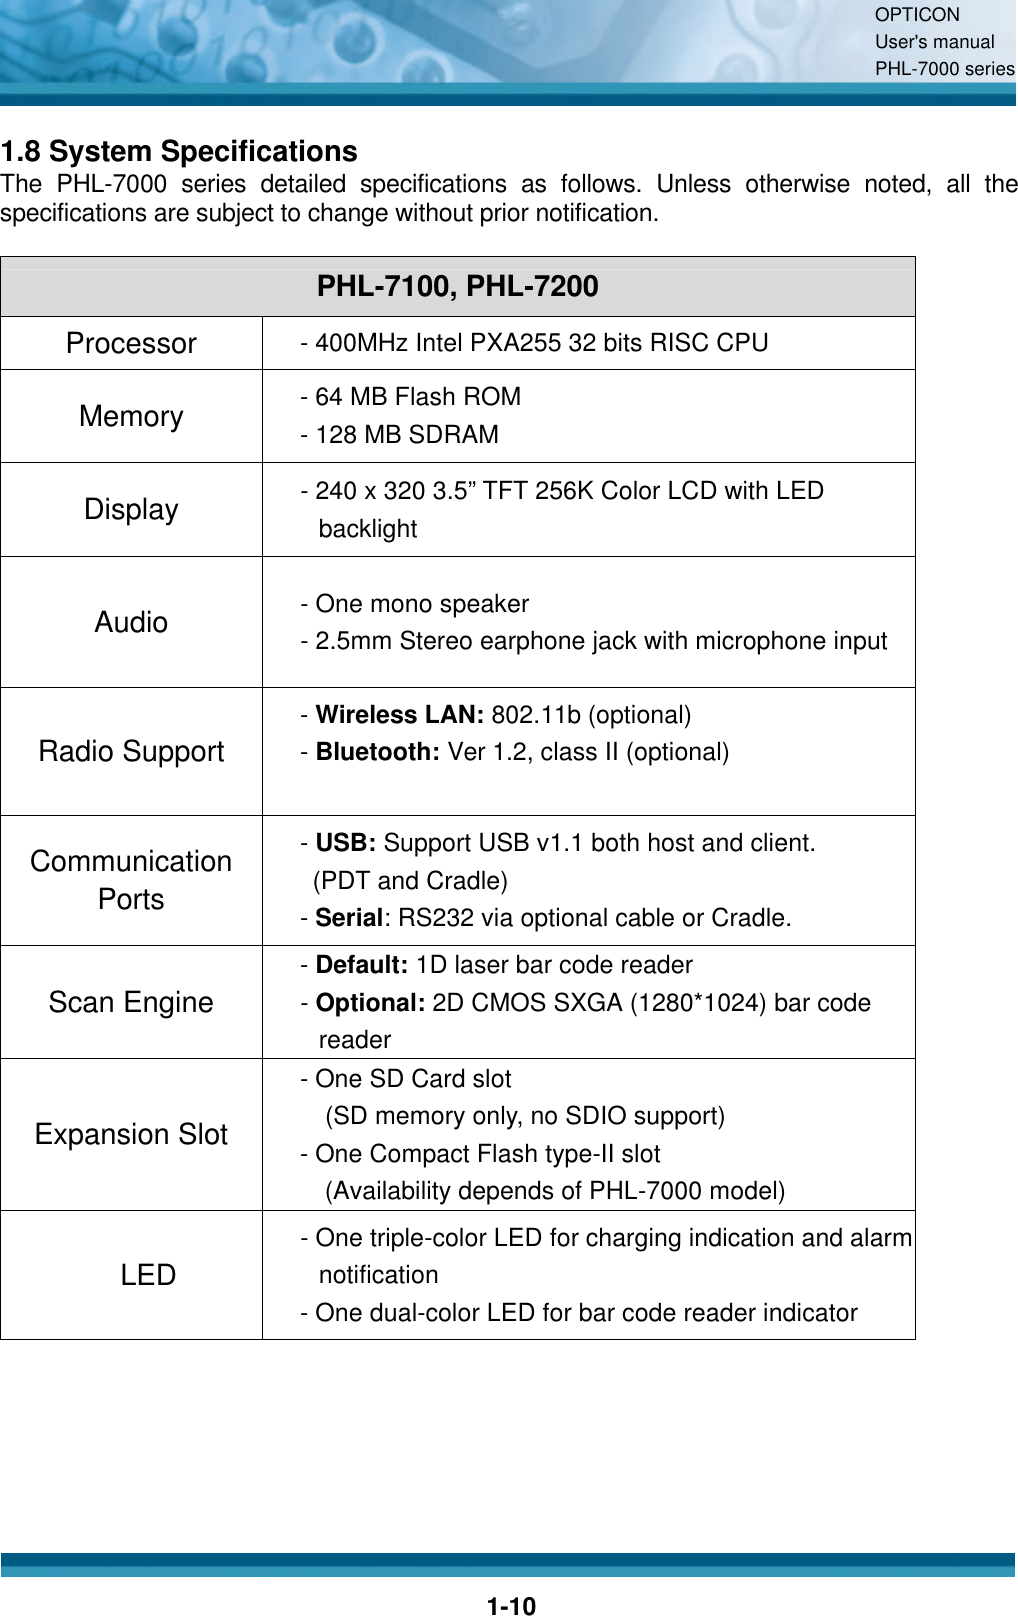 OPTICON User&apos;s manual PHL-7000 series    1-10 1.8 System Specifications The PHL-7000  series  detailed specifications as follows. Unless otherwise noted, all the specifications are subject to change without prior notification.  PHL-7100, PHL-7200 Processor - 400MHz Intel PXA255 32 bits RISC CPU Memory - 64 MB Flash ROM - 128 MB SDRAM Display - 240 x 320 3.5” TFT 256K Color LCD with LED backlight Audio - One mono speaker   - 2.5mm Stereo earphone jack with microphone input Radio Support - Wireless LAN: 802.11b (optional) - Bluetooth: Ver 1.2, class II (optional)  Communication Ports - USB: Support USB v1.1 both host and client. (PDT and Cradle)   - Serial: RS232 via optional cable or Cradle. Scan Engine - Default: 1D laser bar code reader - Optional: 2D CMOS SXGA (1280*1024) bar code reader Expansion Slot - One SD Card slot     (SD memory only, no SDIO support) - One Compact Flash type-II slot     (Availability depends of PHL-7000 model) LED - One triple-color LED for charging indication and alarm notification - One dual-color LED for bar code reader indicator 